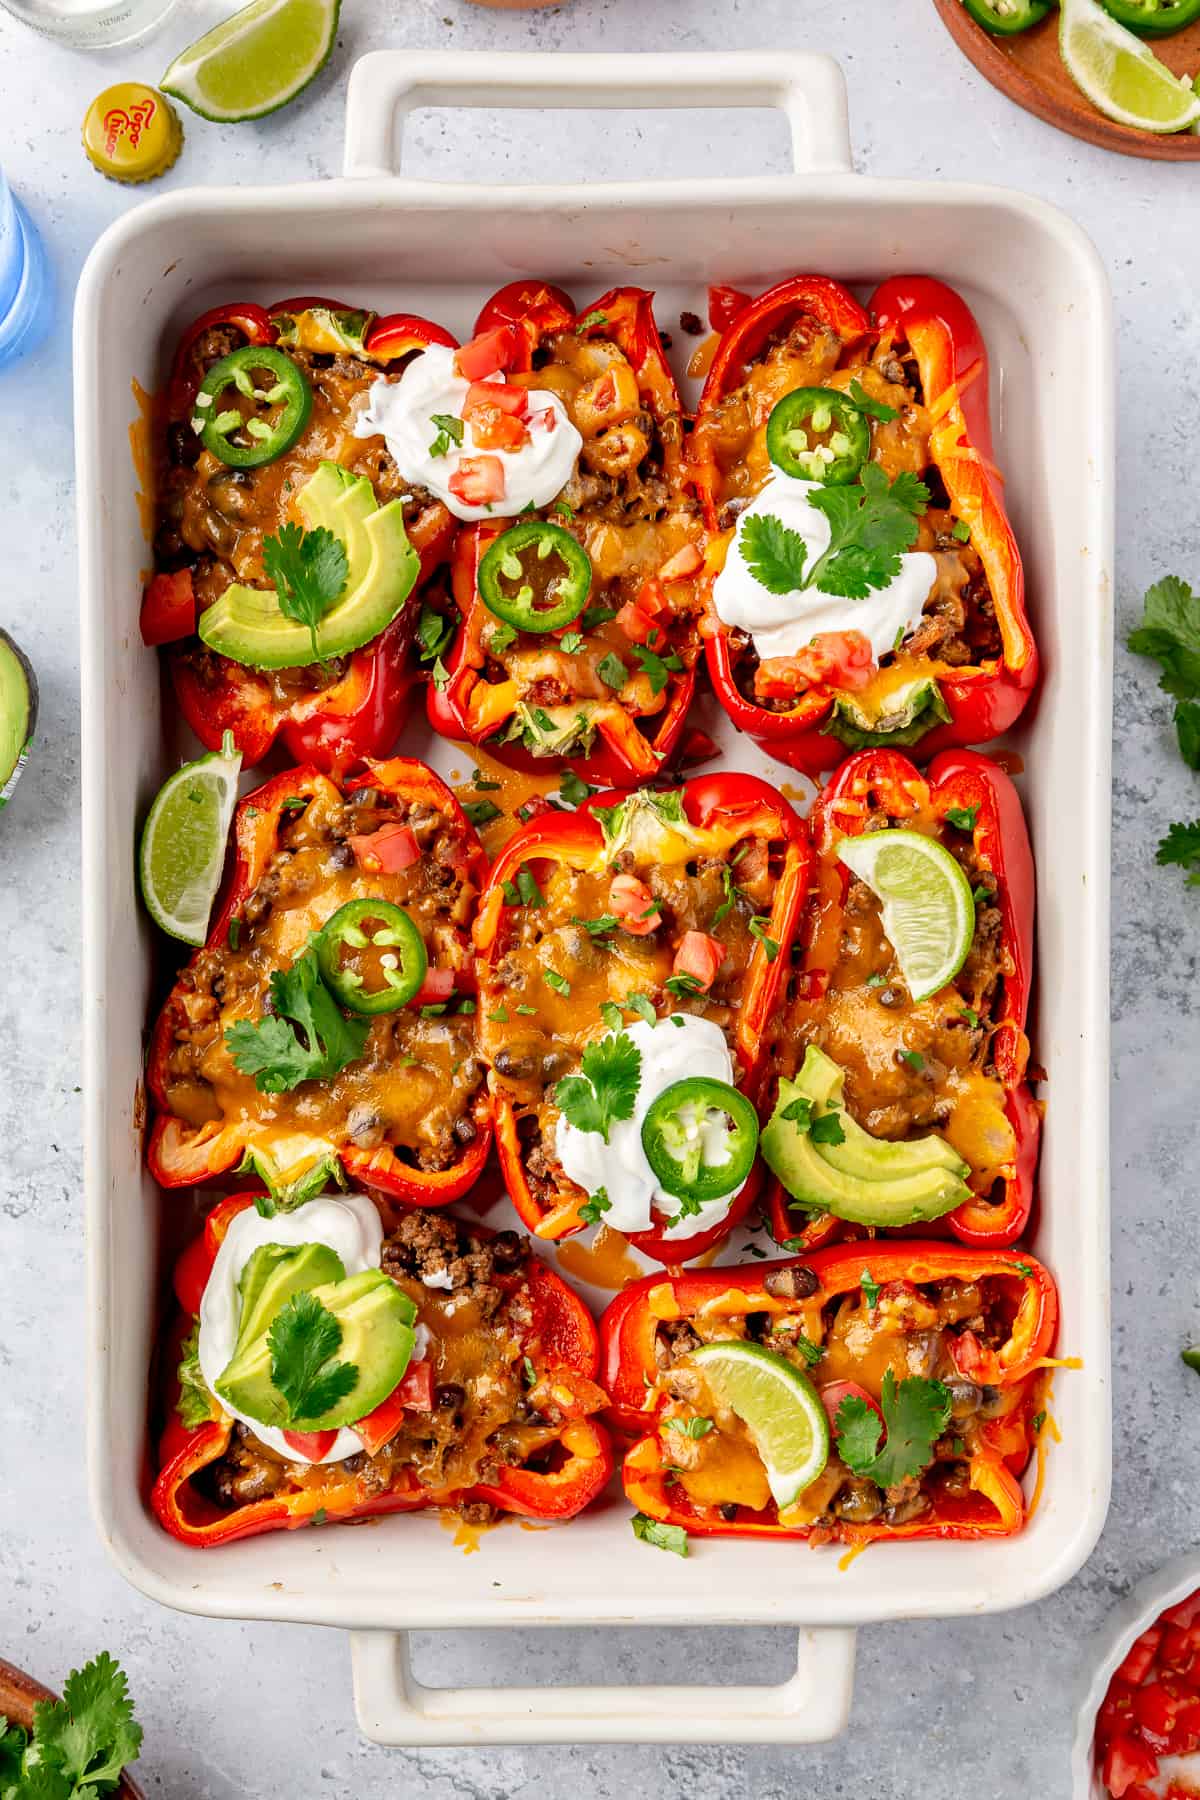 Taco stuffed peppers in a baking dish.